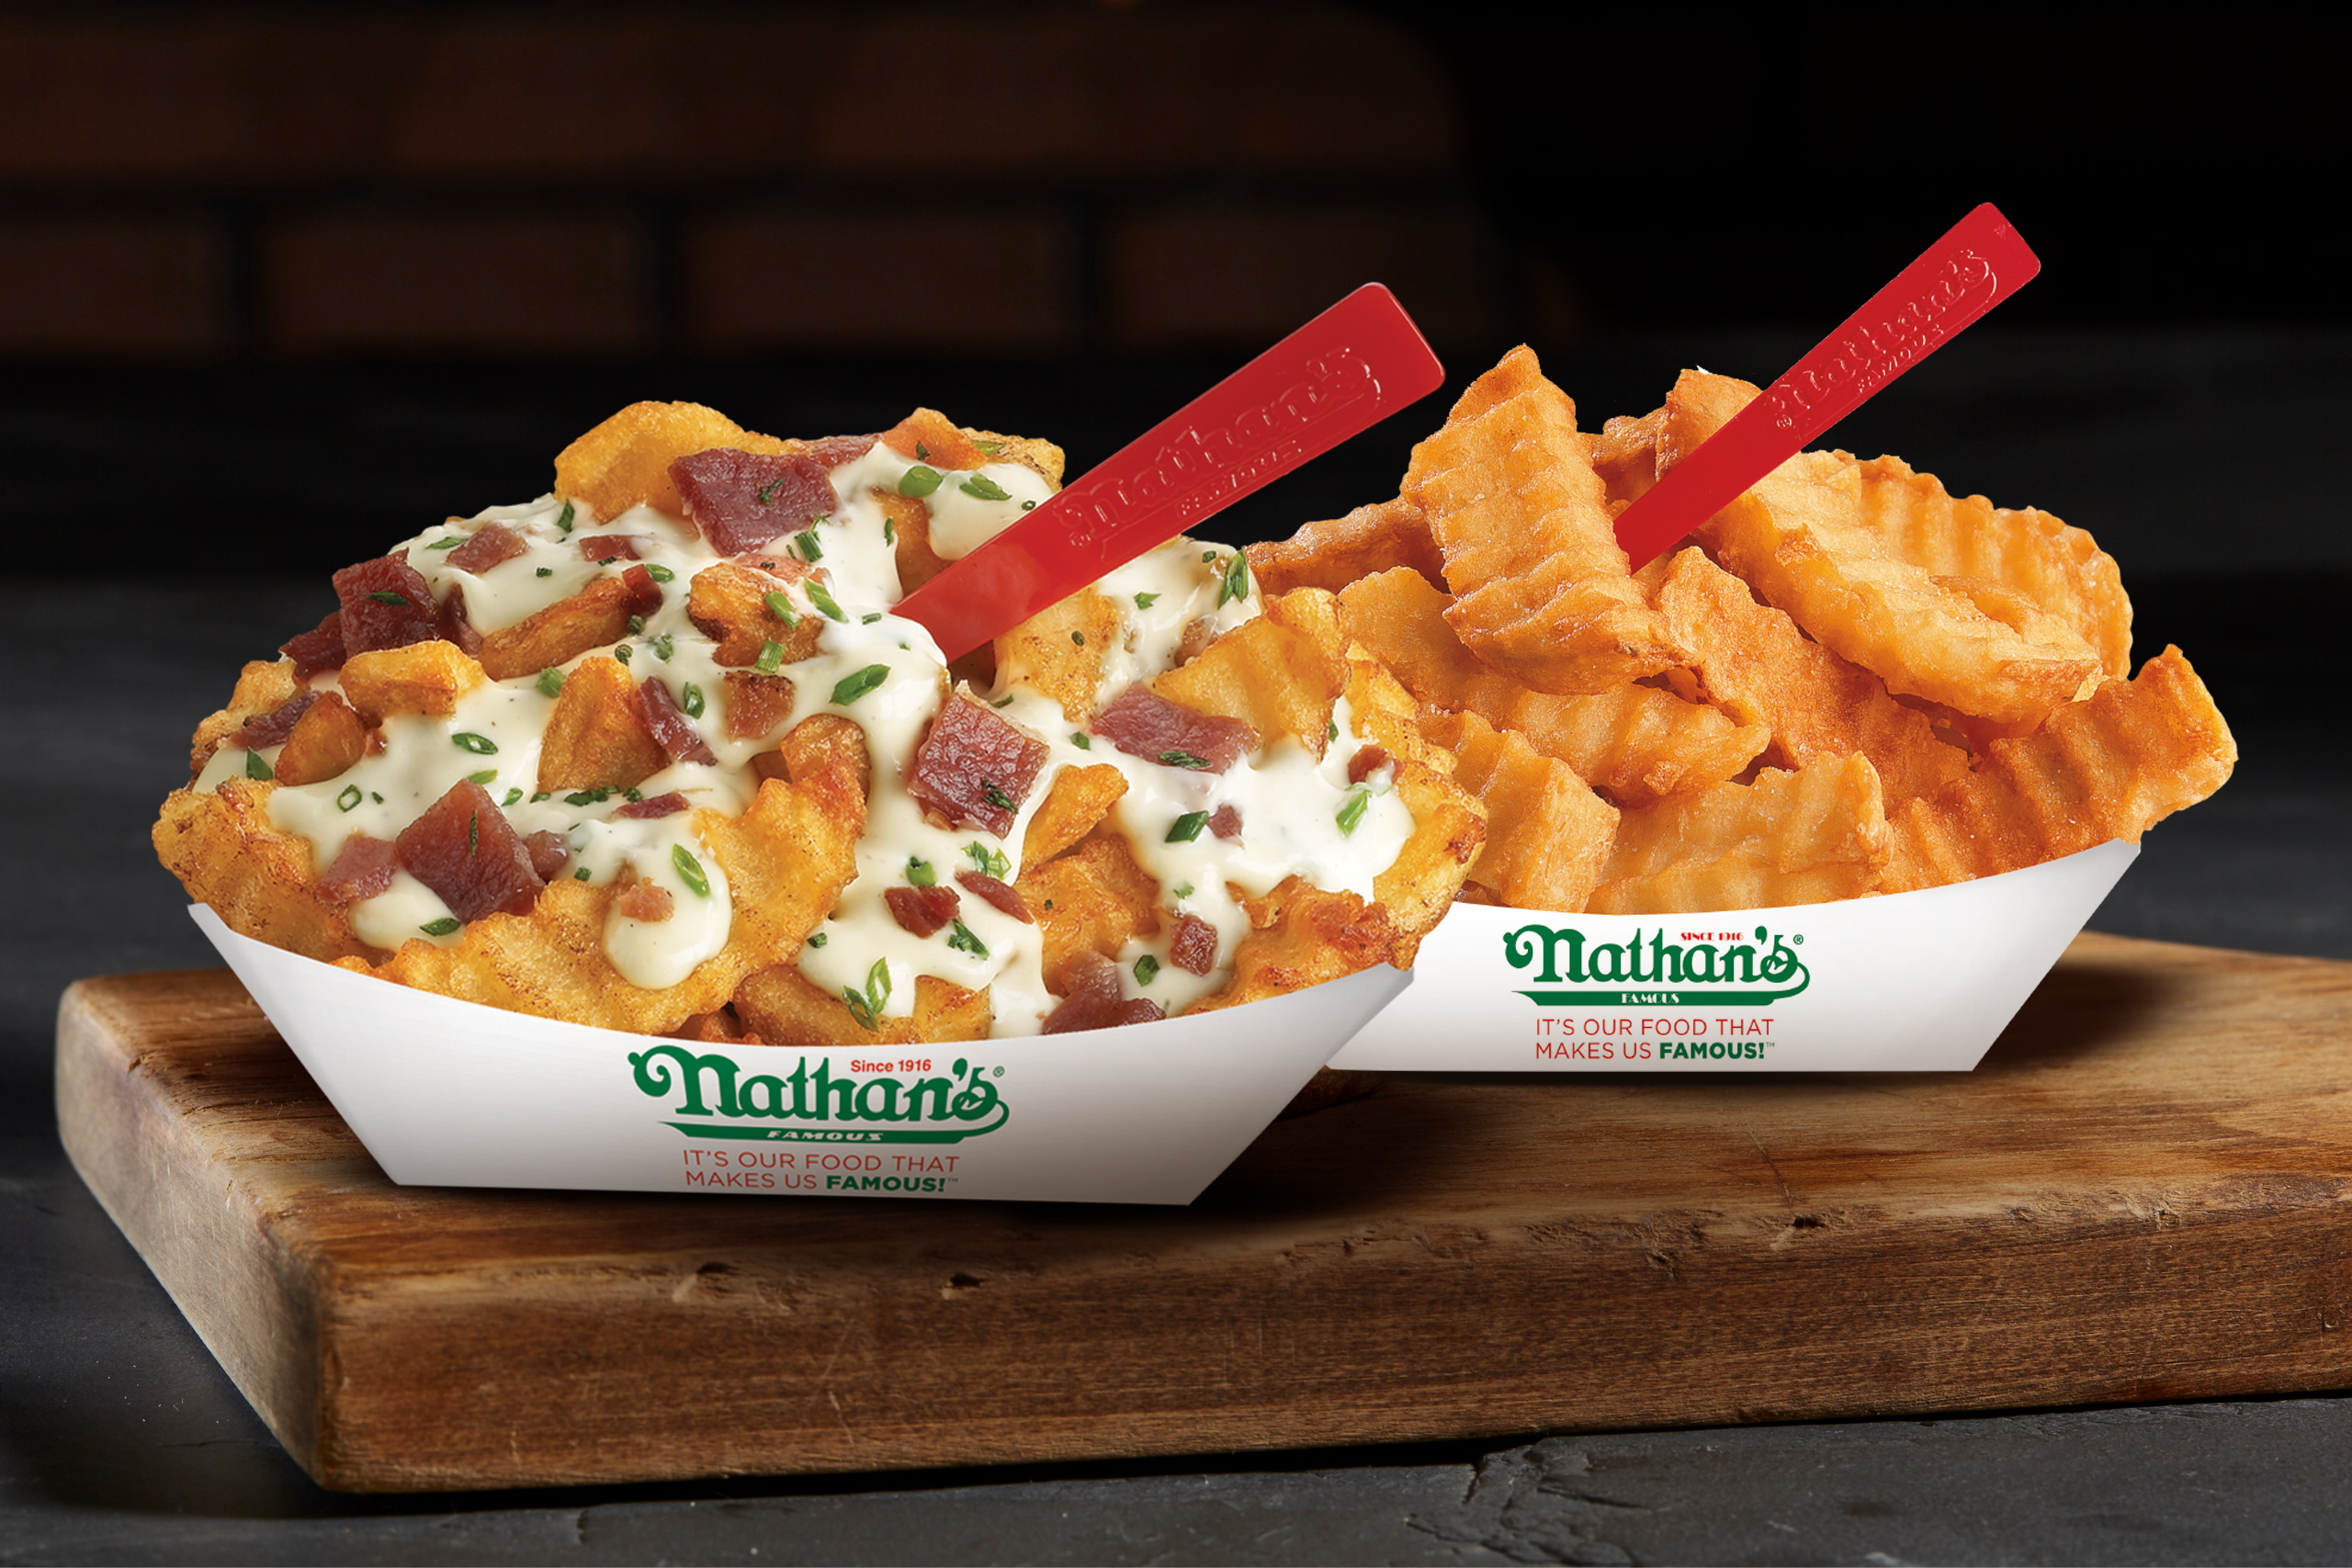 Nathan's fries and cheese fries